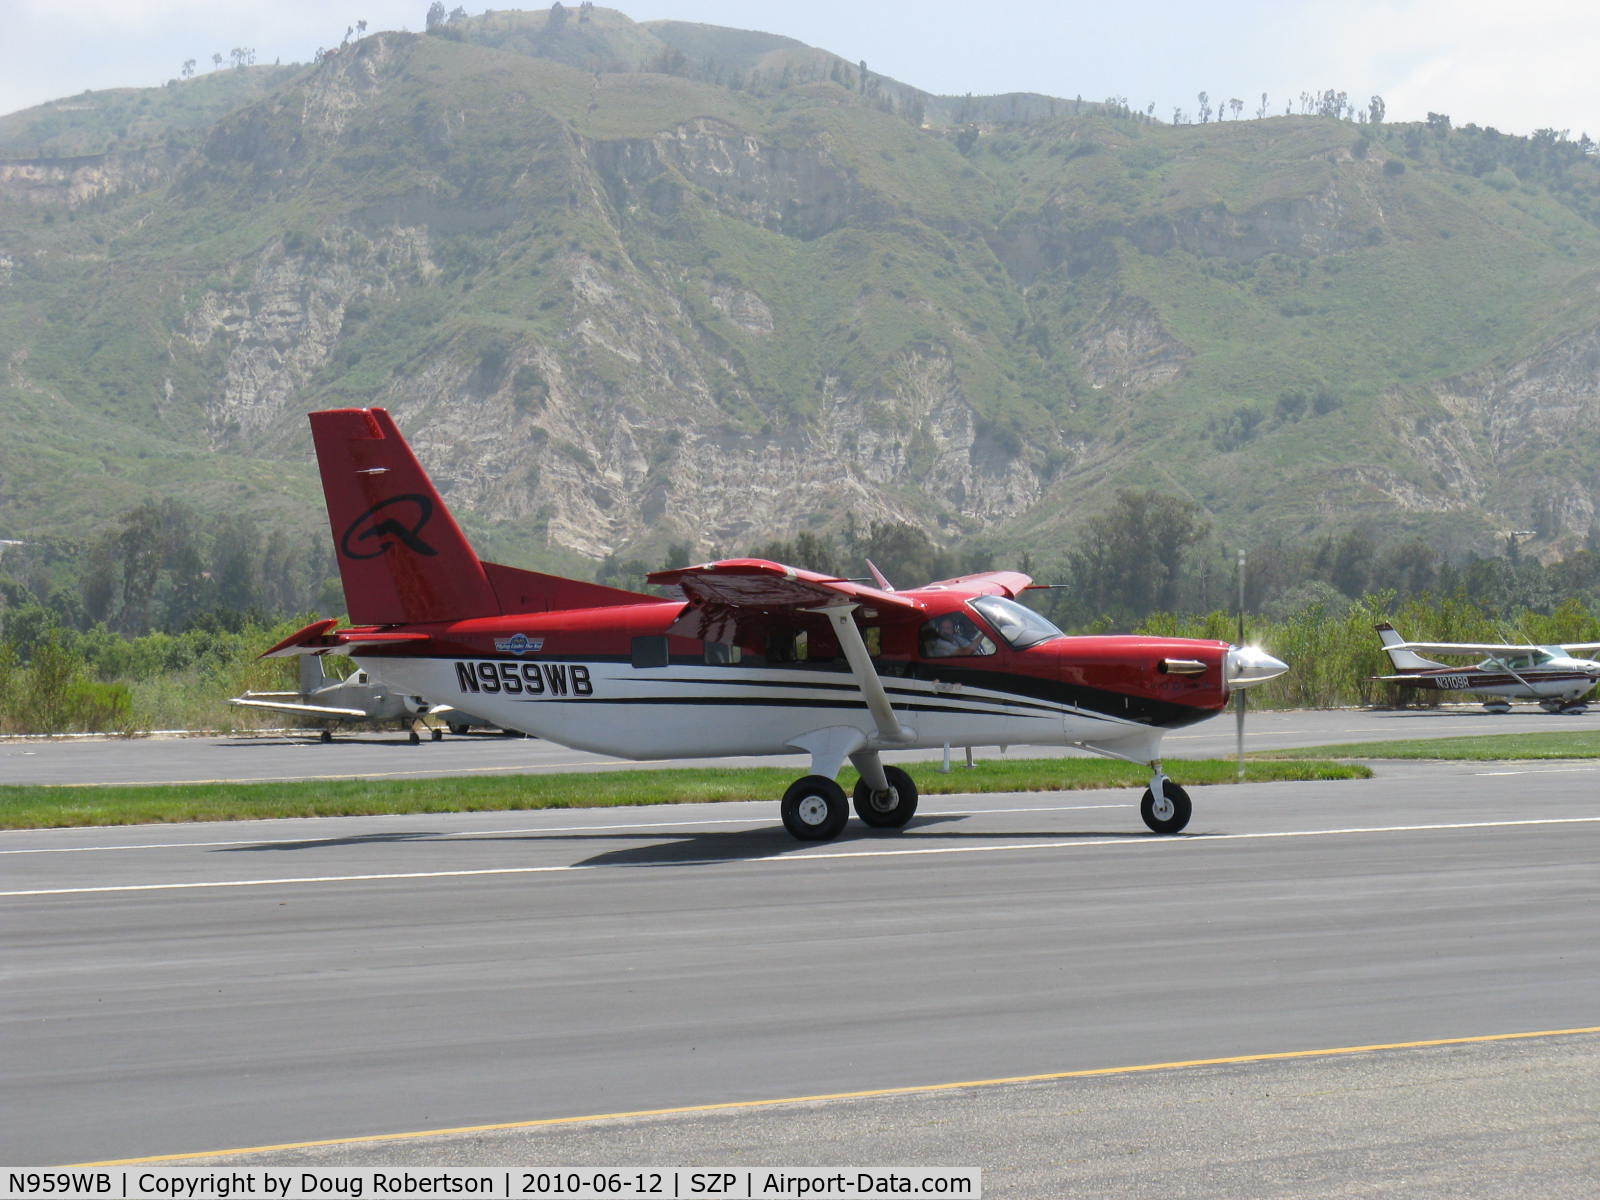 N959WB, 2009 Quest Kodiak 100 C/N 100-0016, 2009 Quest Aircraft KODIAK 100, P&W(Canada)PT6A-34 750 shp, taxi off the active after STOL landing using reversible pitch prop during touchdown roll-IMPRESSIVE!